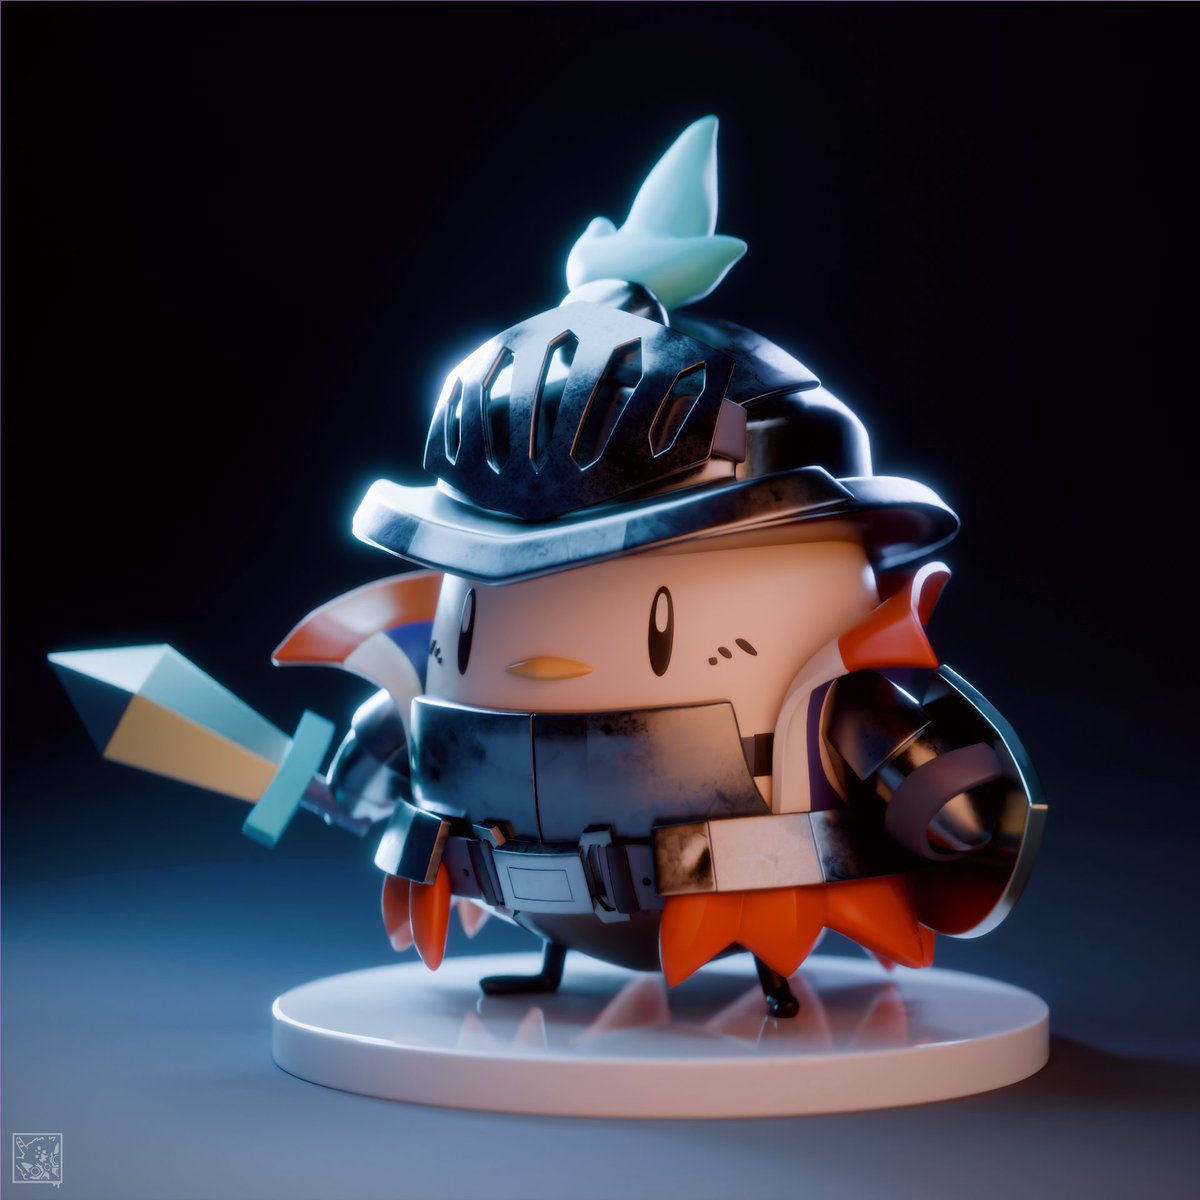 KFP knight

Trying new render style
Thank you, @ArtPkoi, for lending me the concept~
#KFPicasso